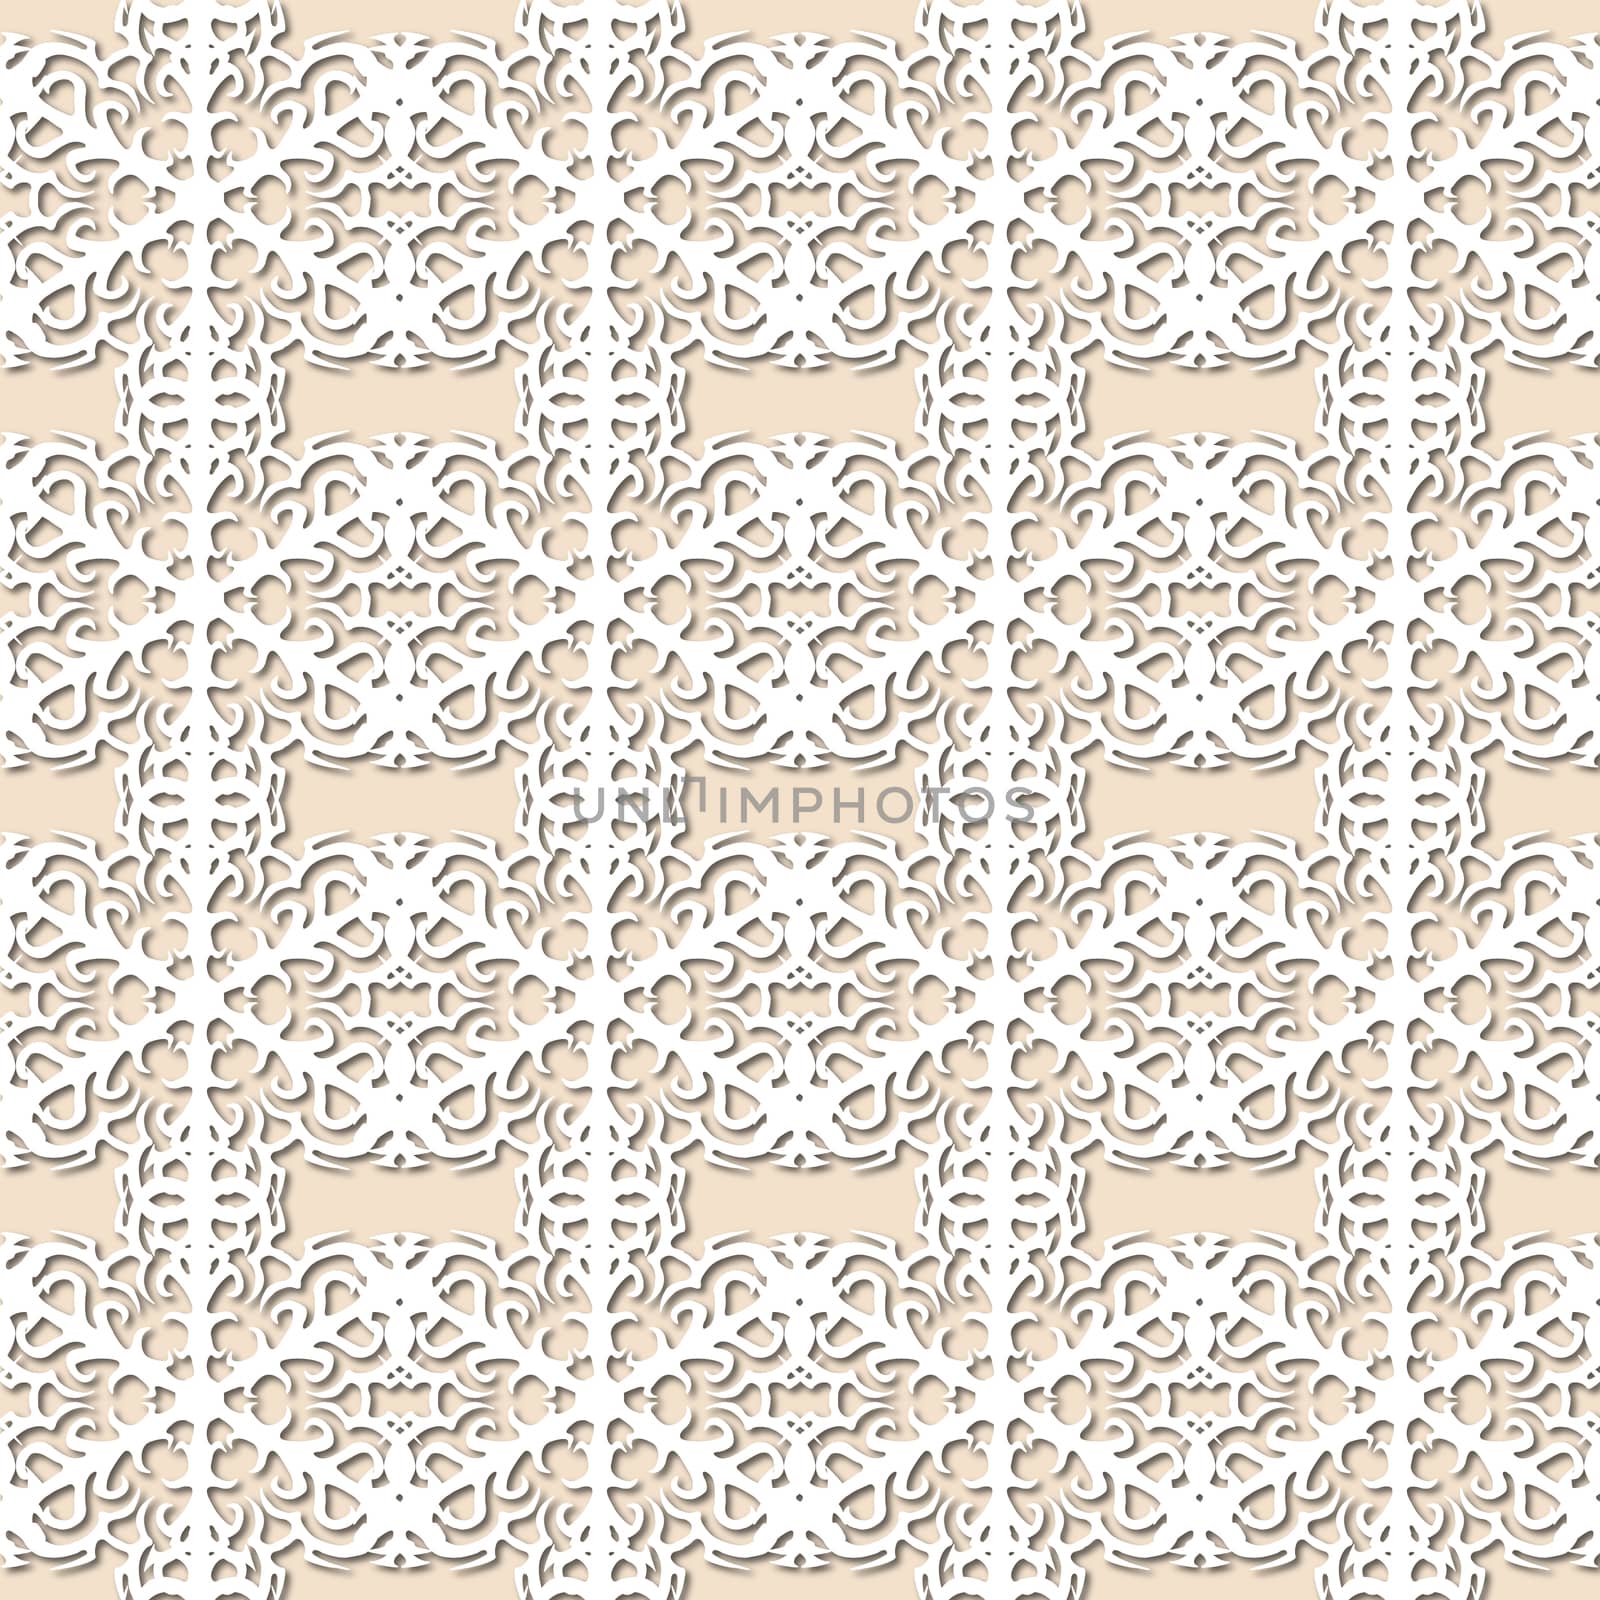 White snowflakes on pale pink, beige background, damask ornament seamless pattern. Paper cut style with drop shadows and highlights.